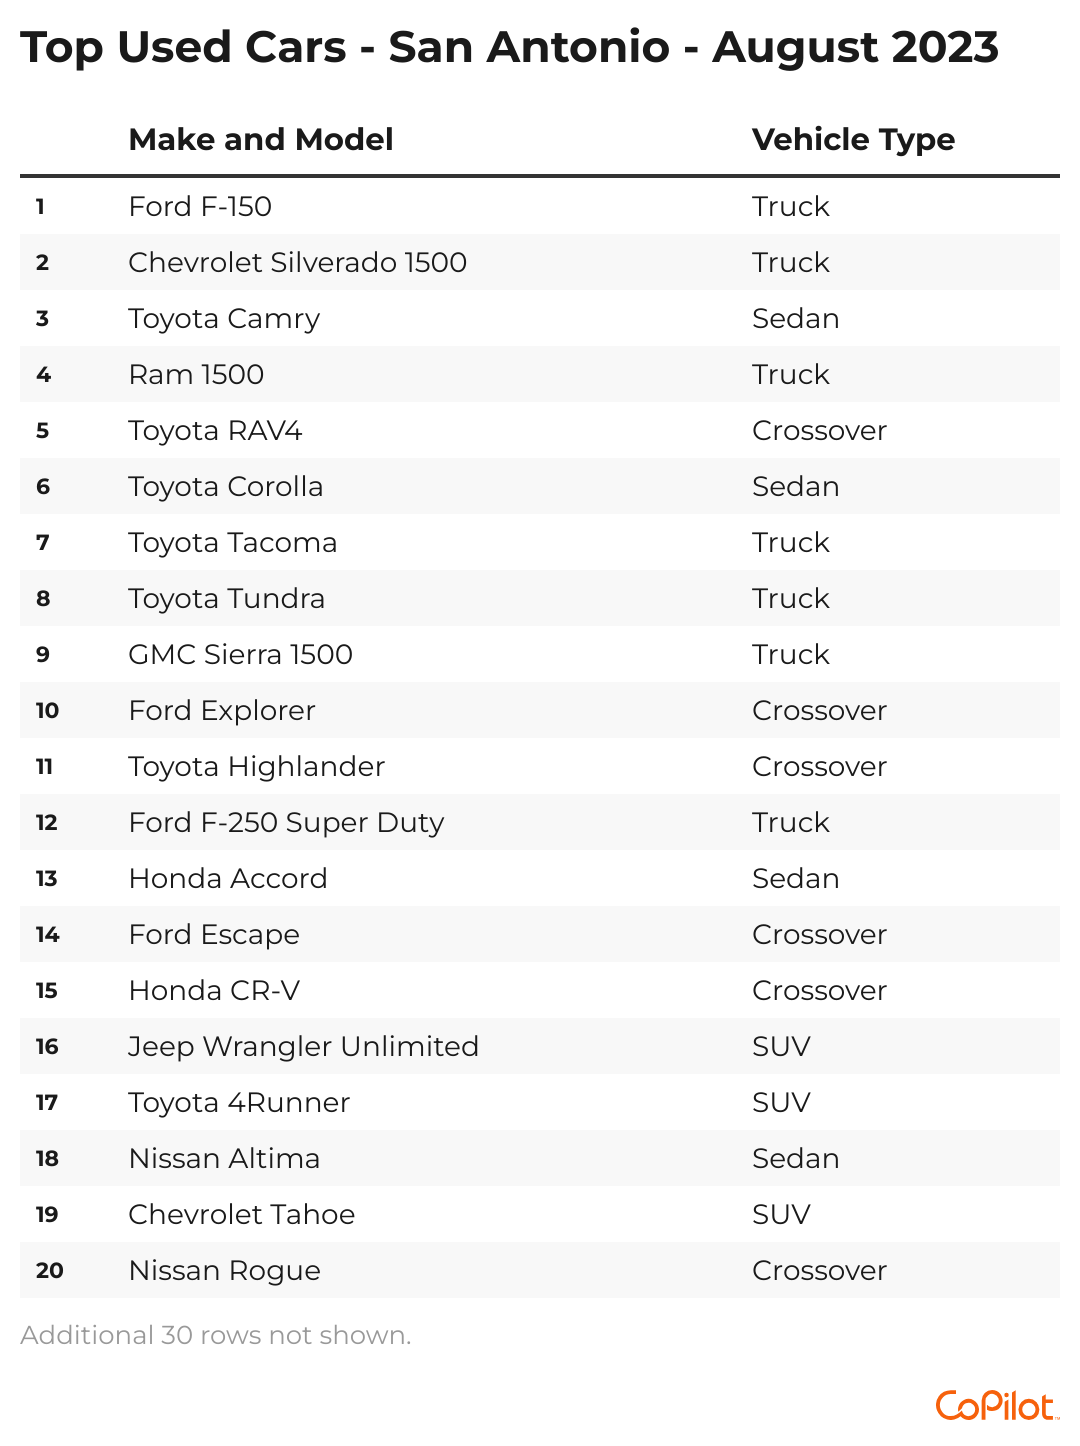 A chart showing the 20 top-selling used cars in the San Antonio metro area